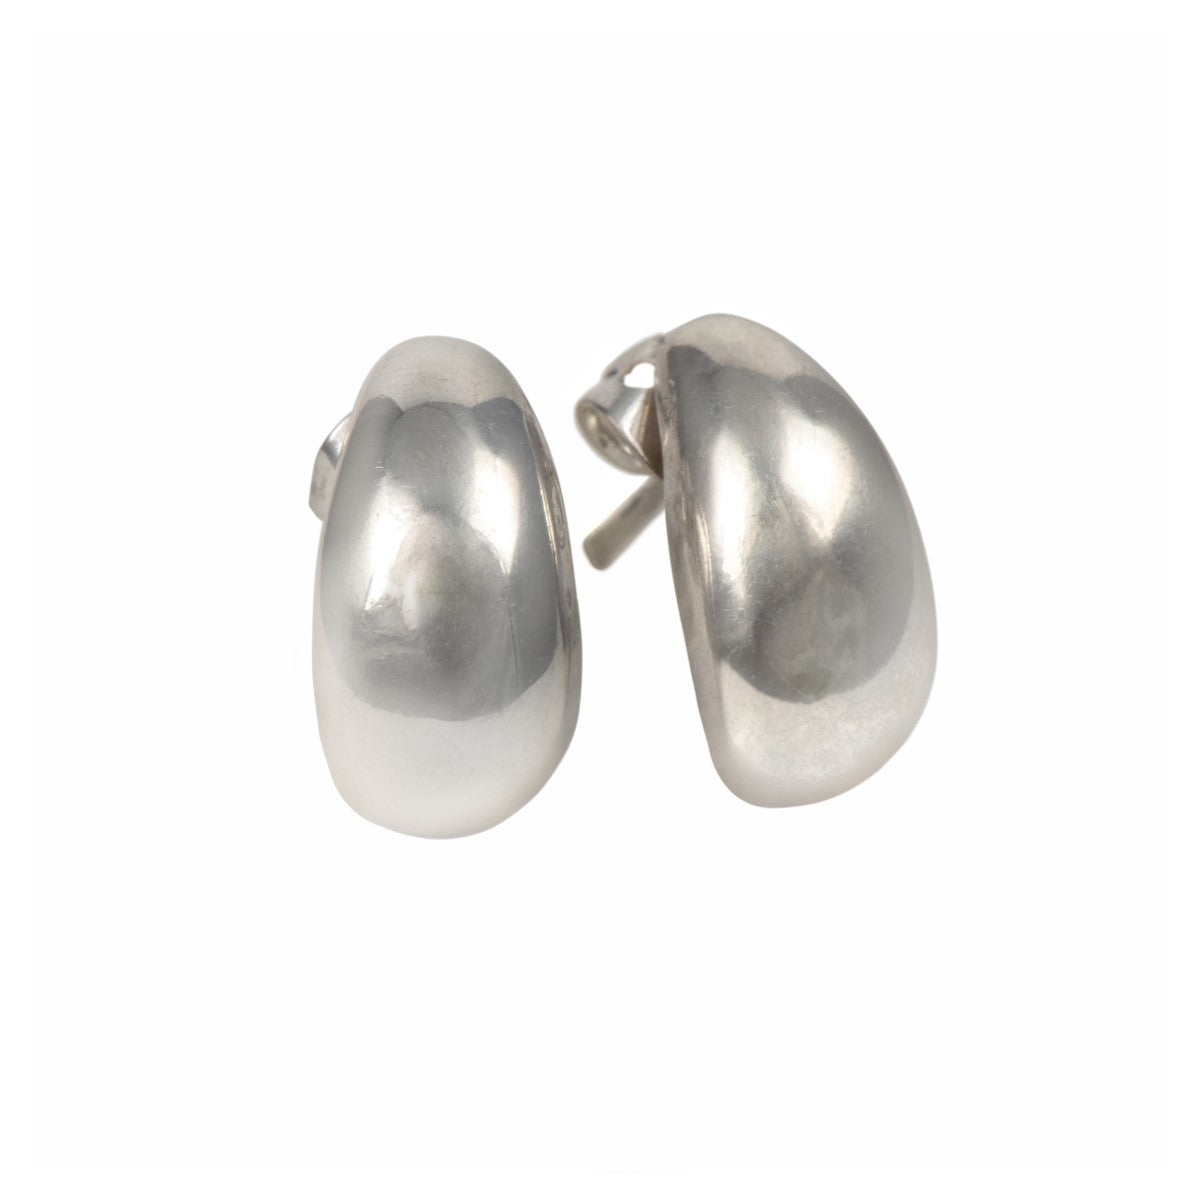 Sterling Silver Studs with a Curved Teardrop Shape